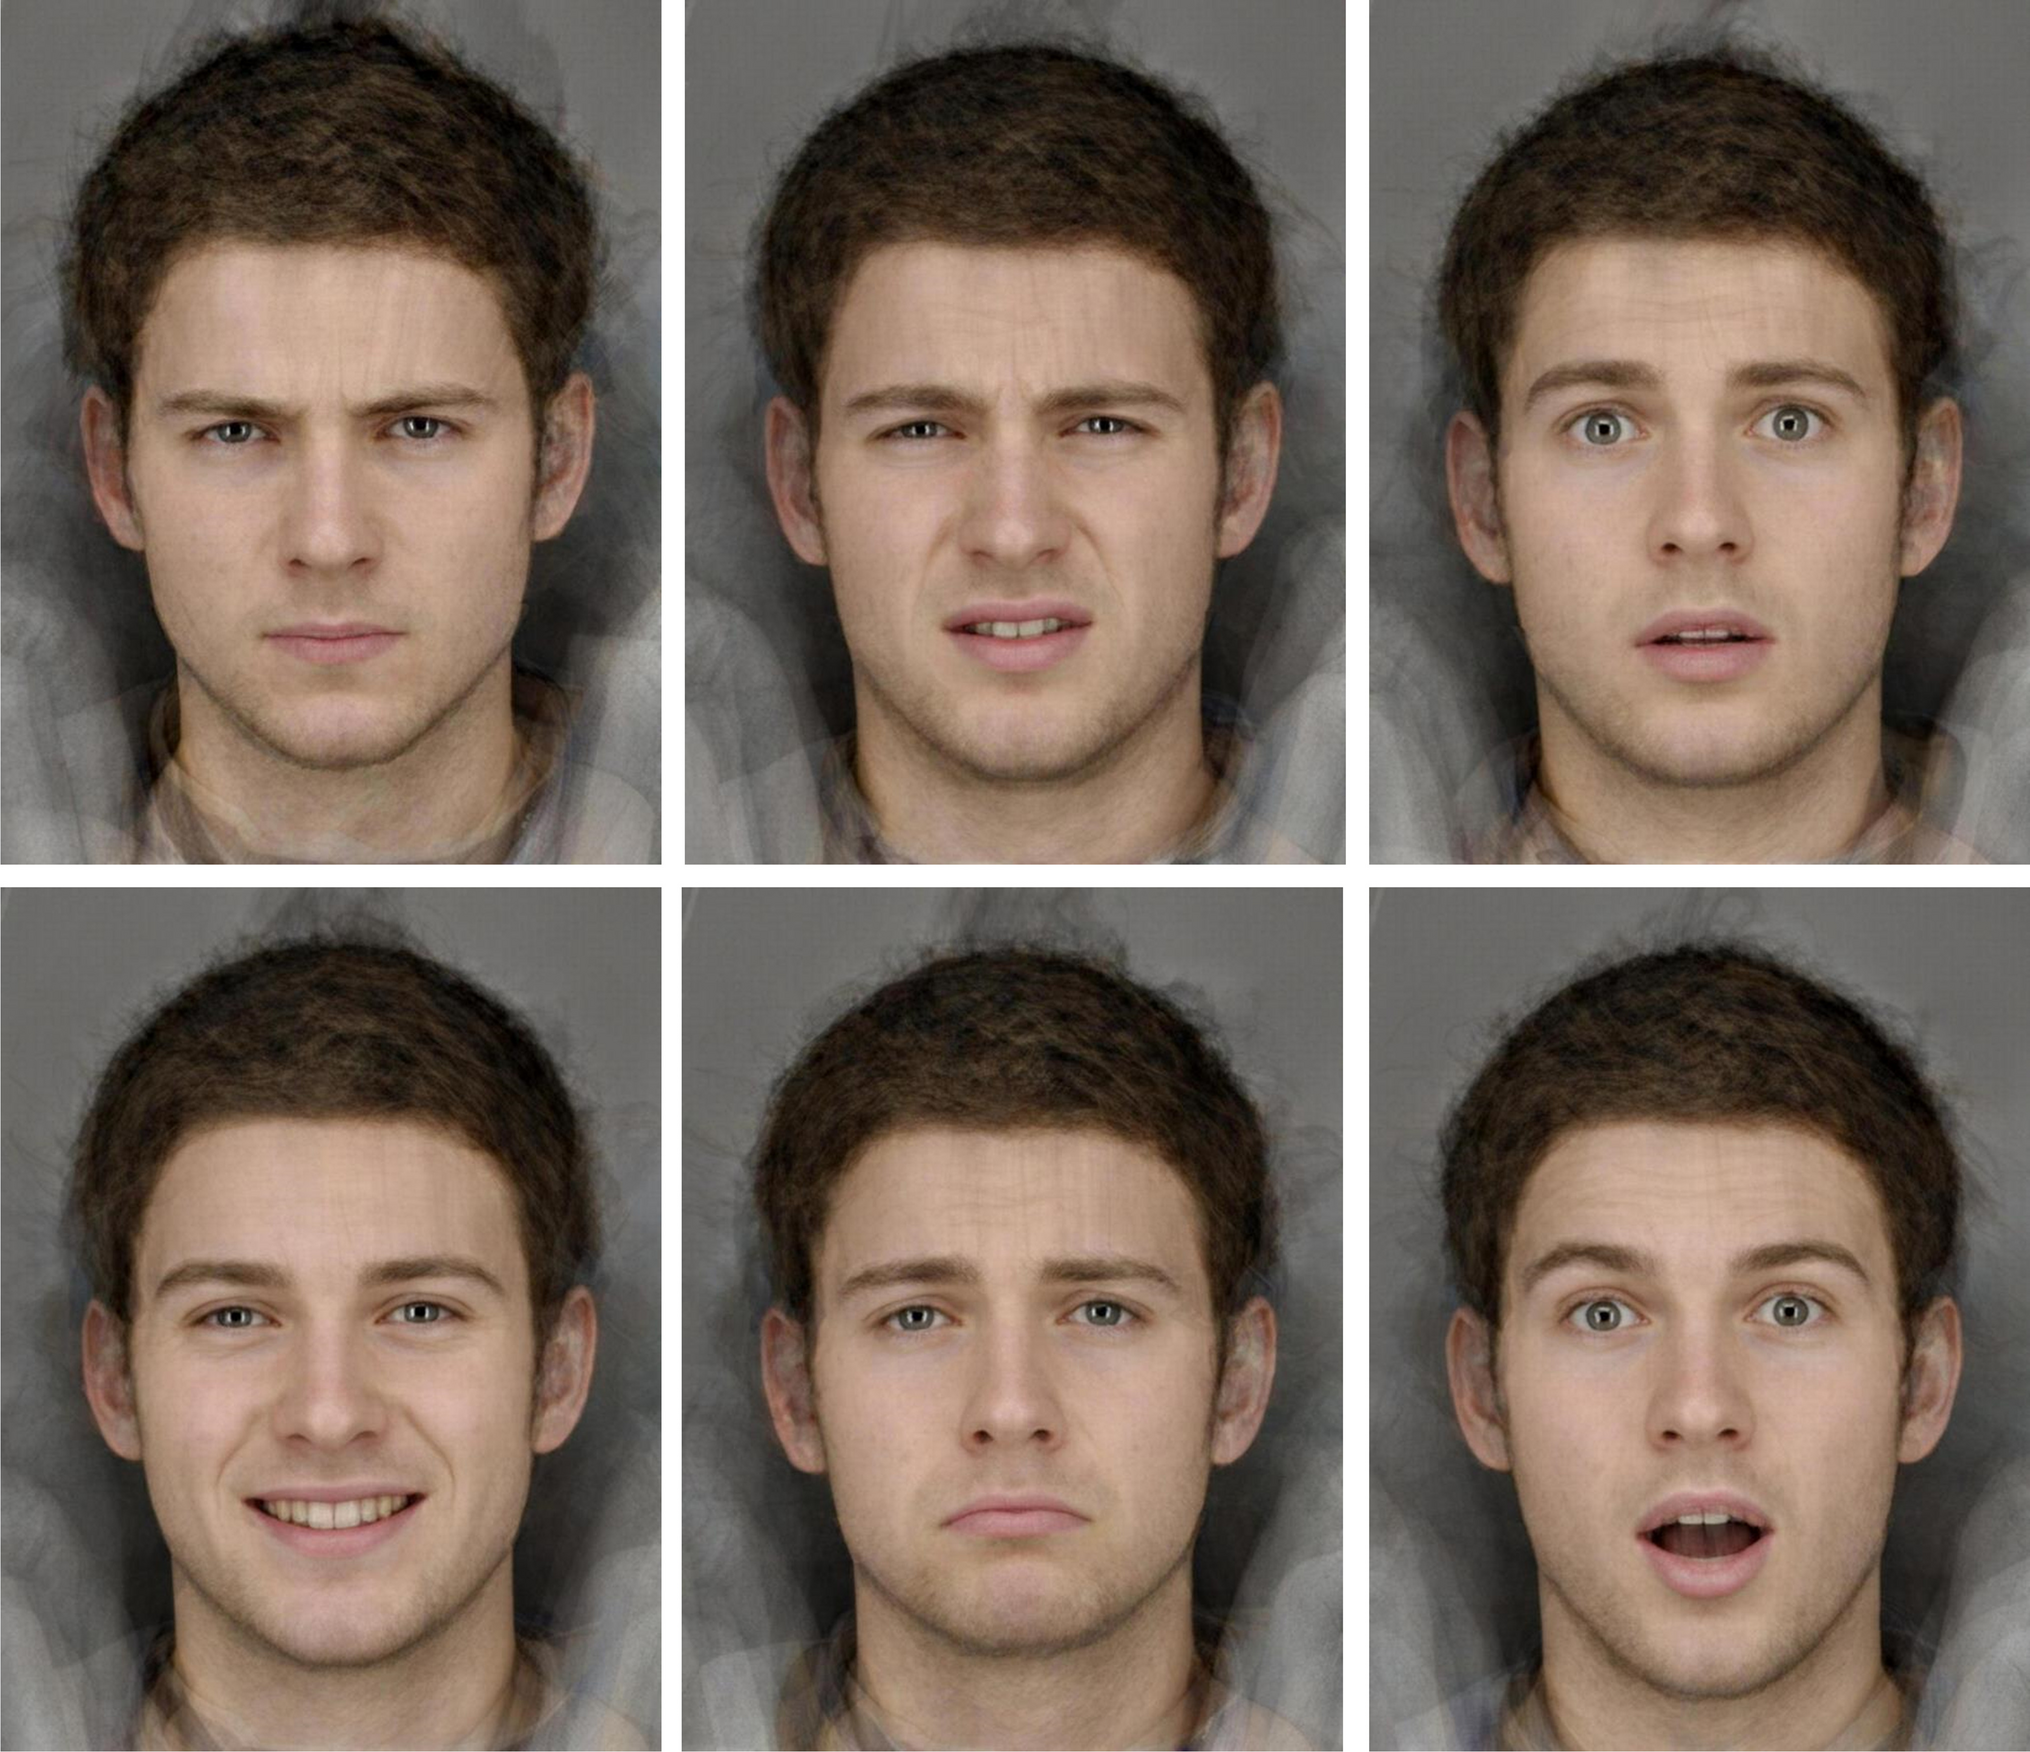 Supraphysiological testosterone levels from anabolic steroid use and reduced sensitivity to negative facial expressions in men